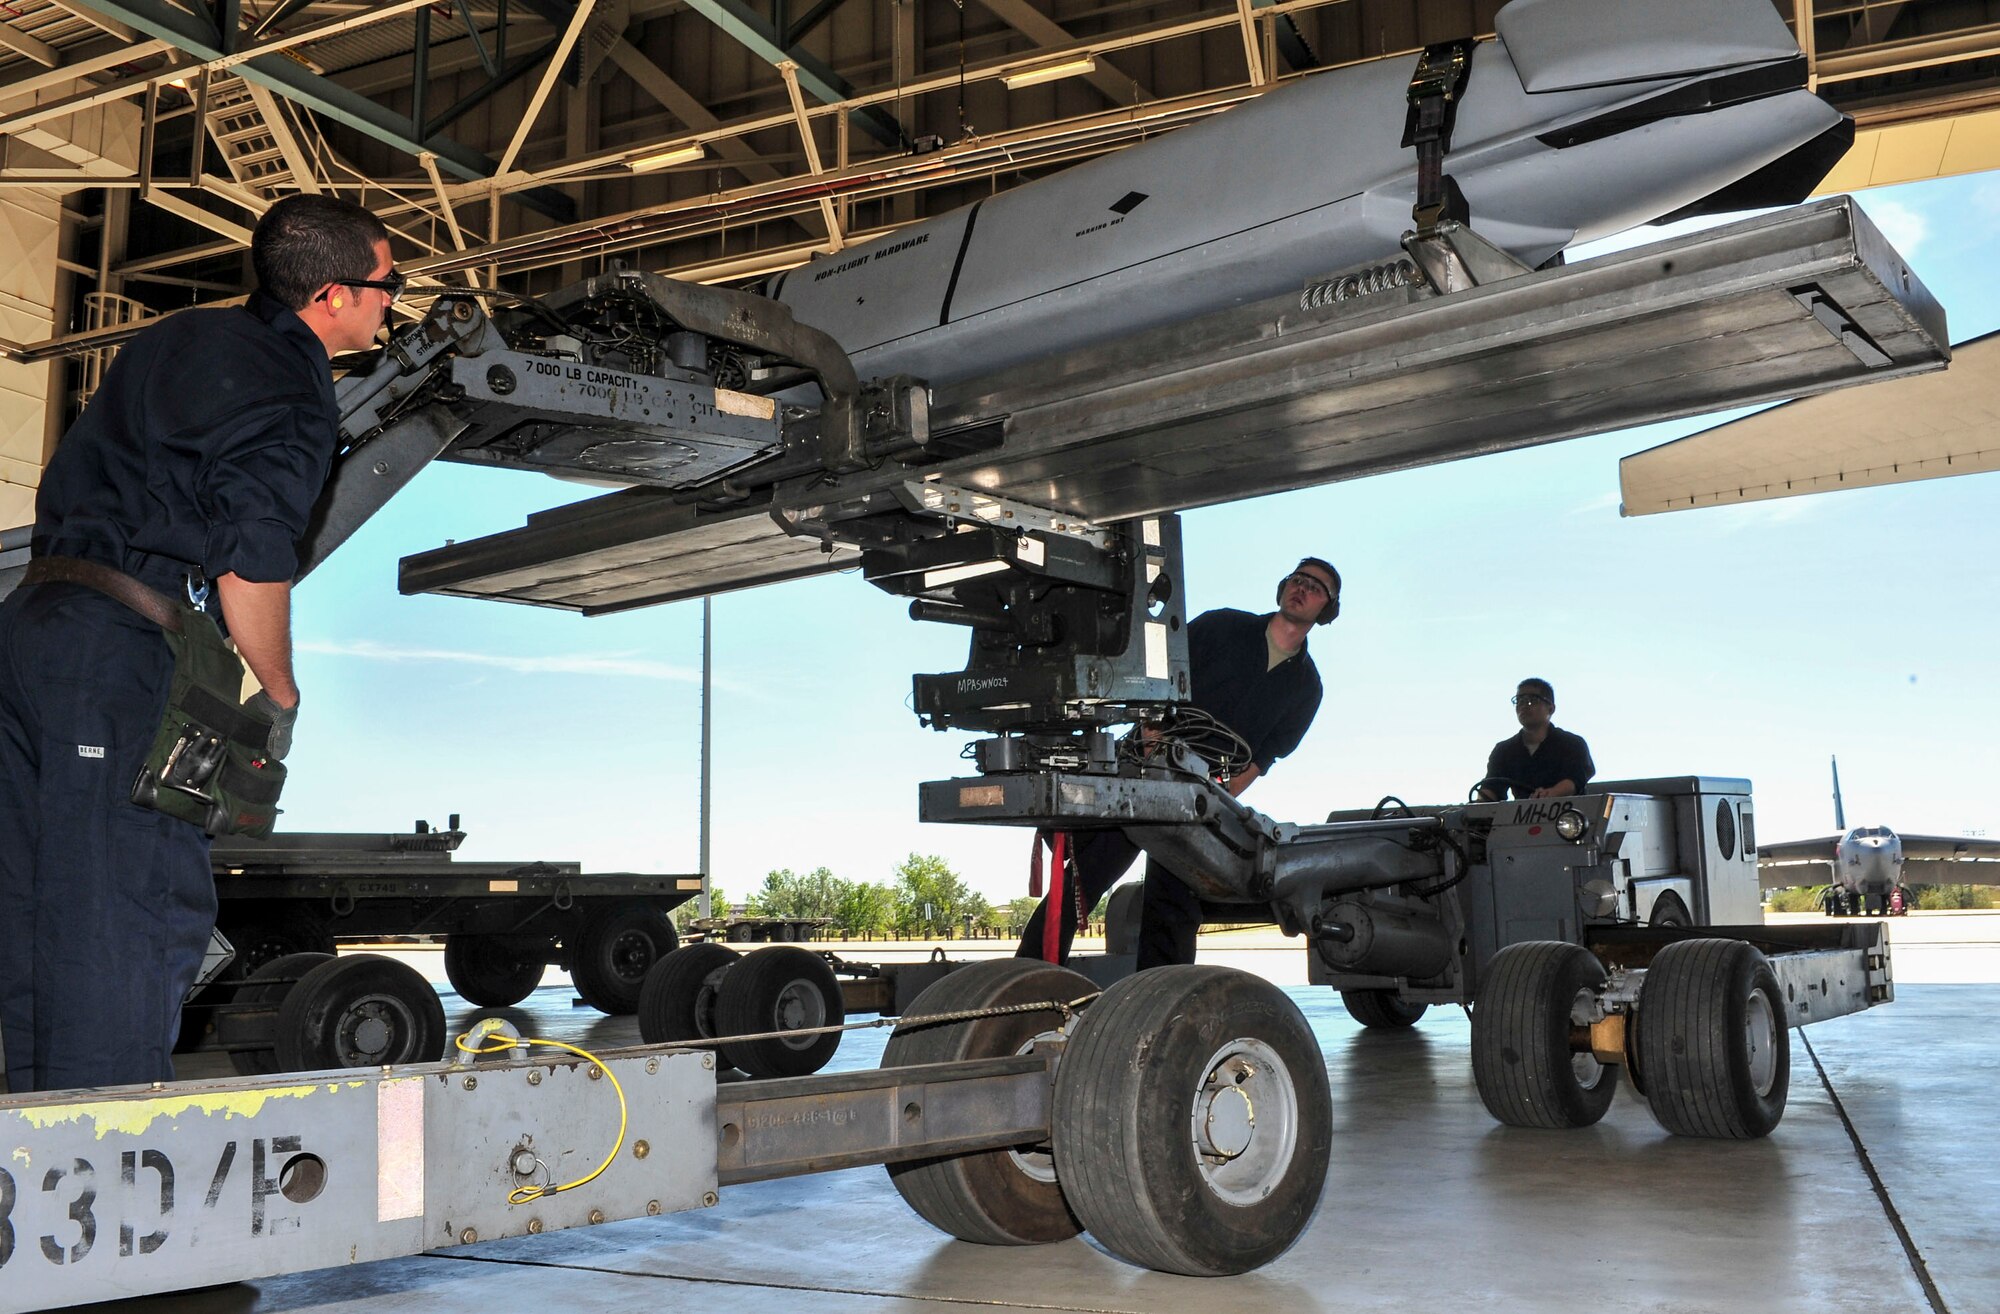 Members of the 5th Aircraft Maintenance Squadron maneuver a “jammer” to transport weapon systems to the wing of a B-52H Stratofortress at Minot Air Force Base, N.D., Aug. 24, 2015. The group was required to load four weapons onto the aircraft as part of Air Force Global Strike Command’s Global Strike Challenge Competition -- a task they completed in approximately 60 minutes. (U.S. Air Force photo/Senior Airman Stephanie Morris)